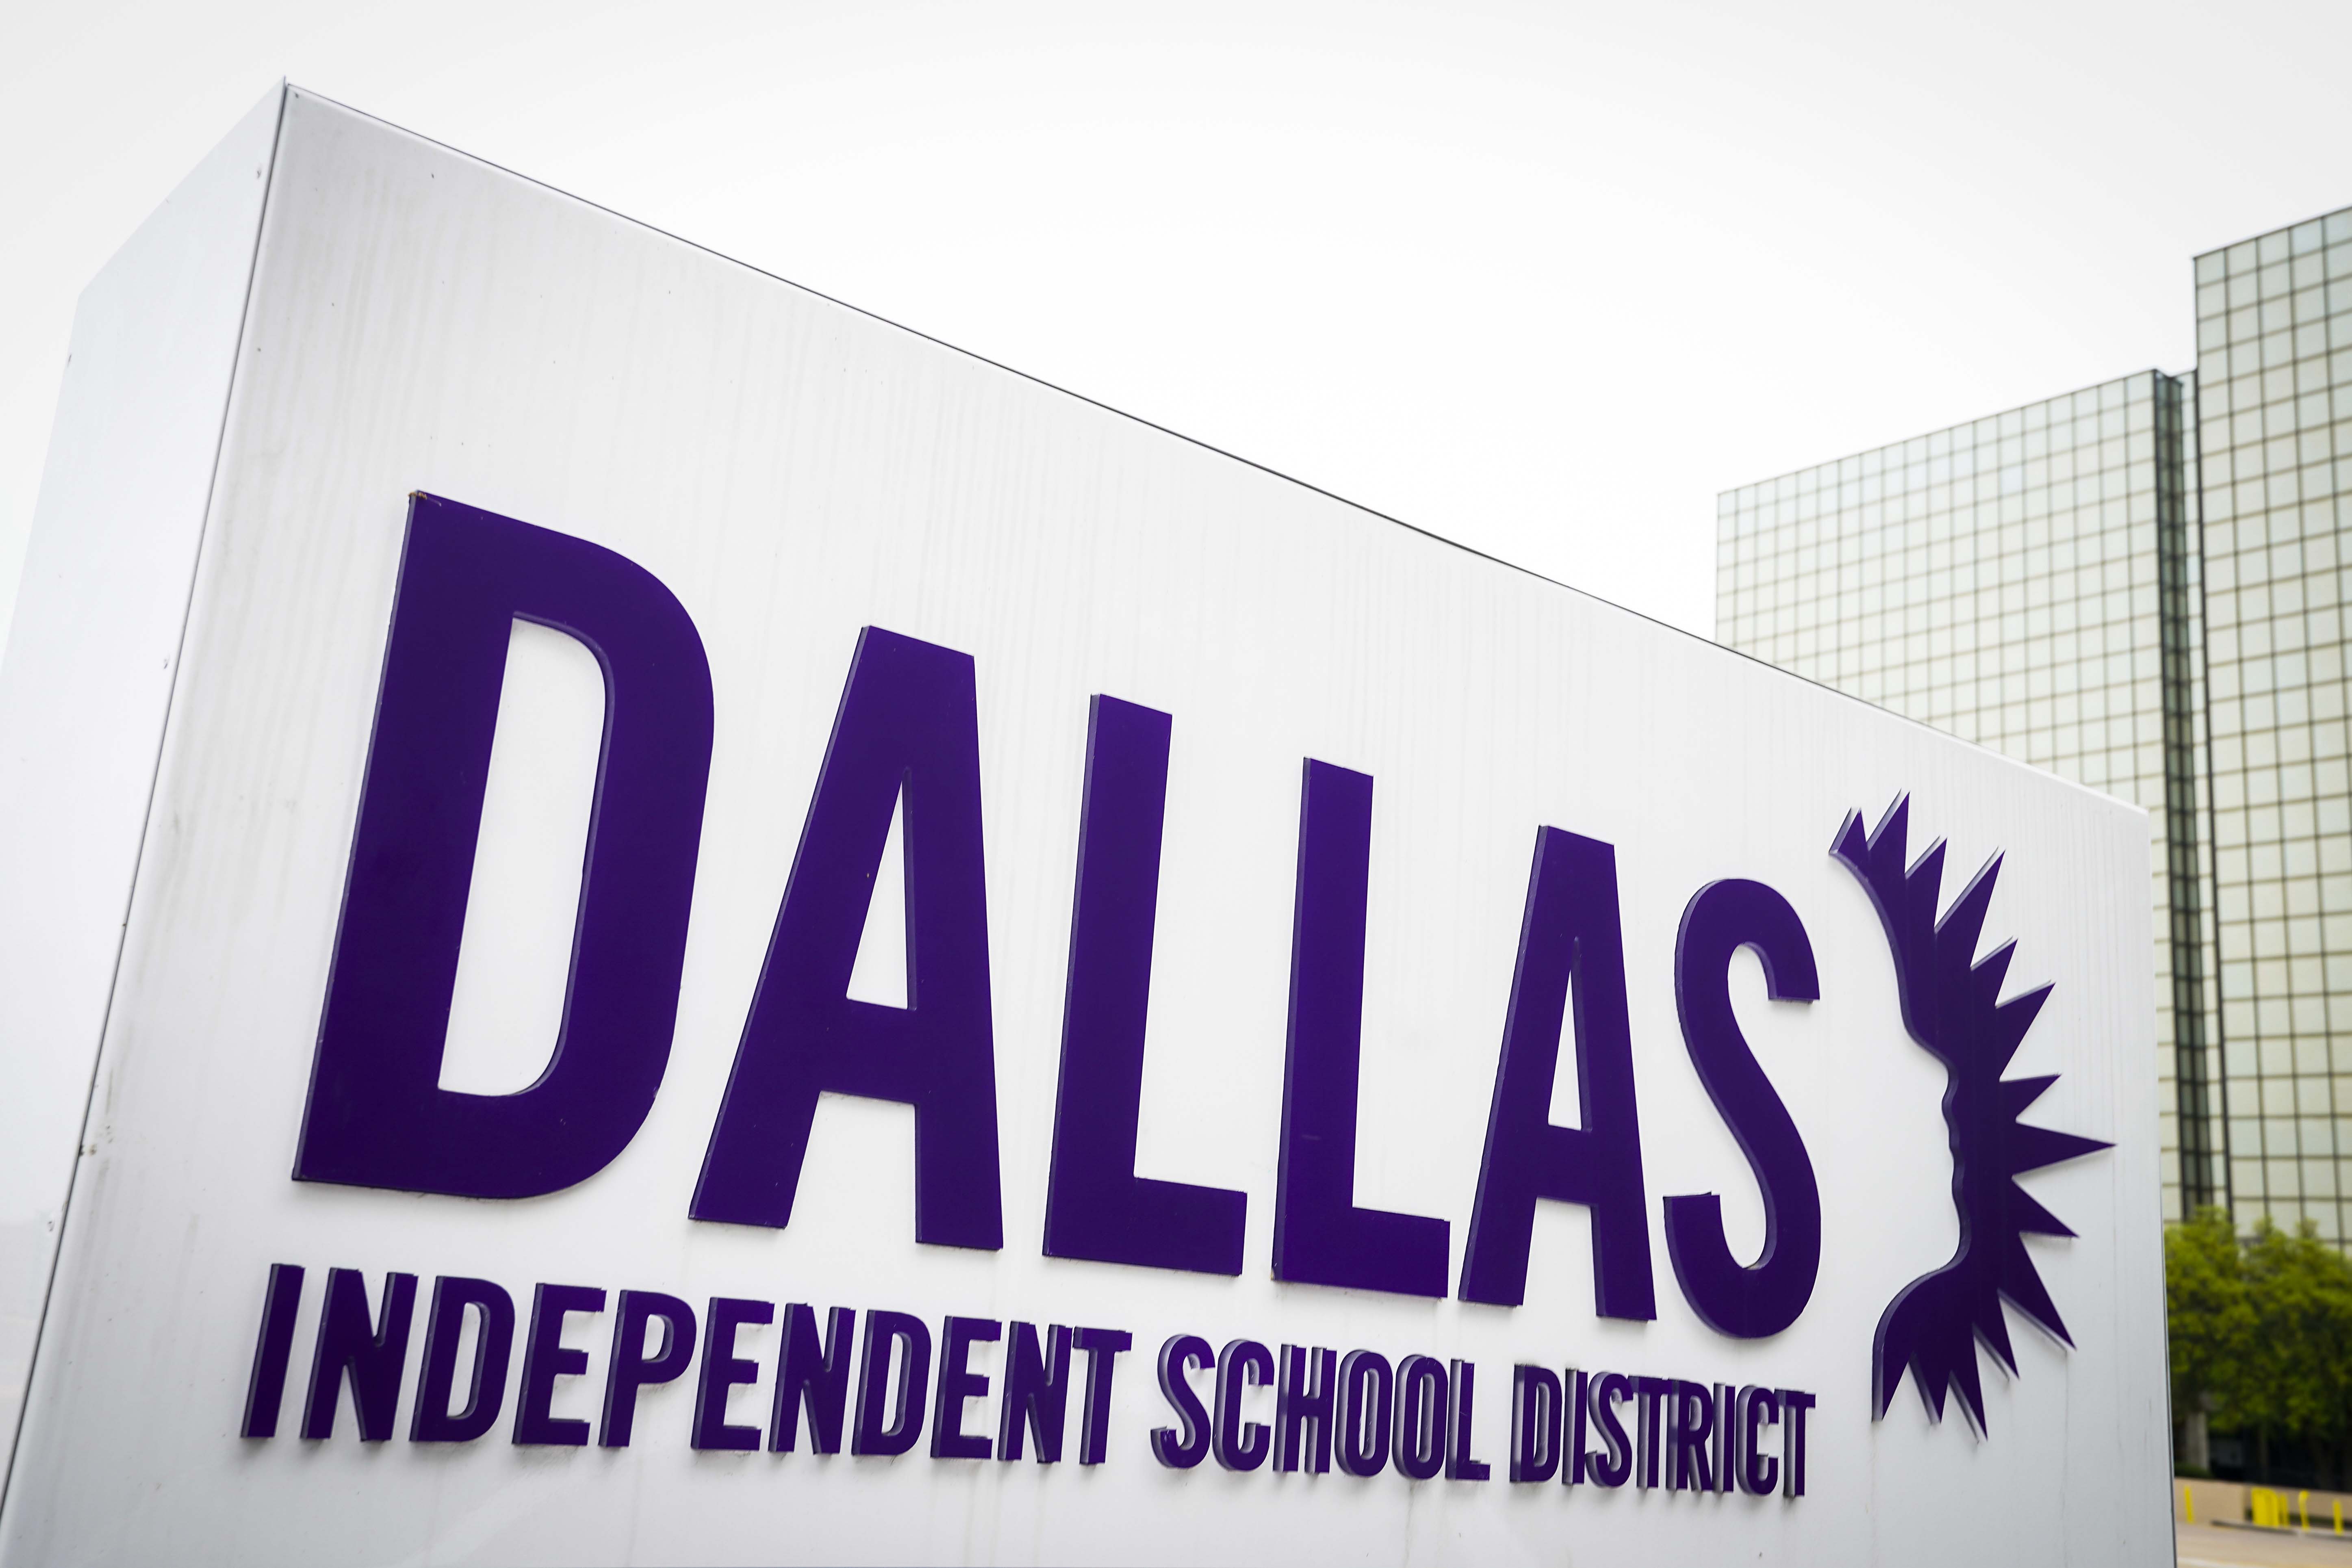 Dallas Isd Asking For Five More Weeks Of Classes For Some Students To  Battle Learning Losses Brought On By Covid-19